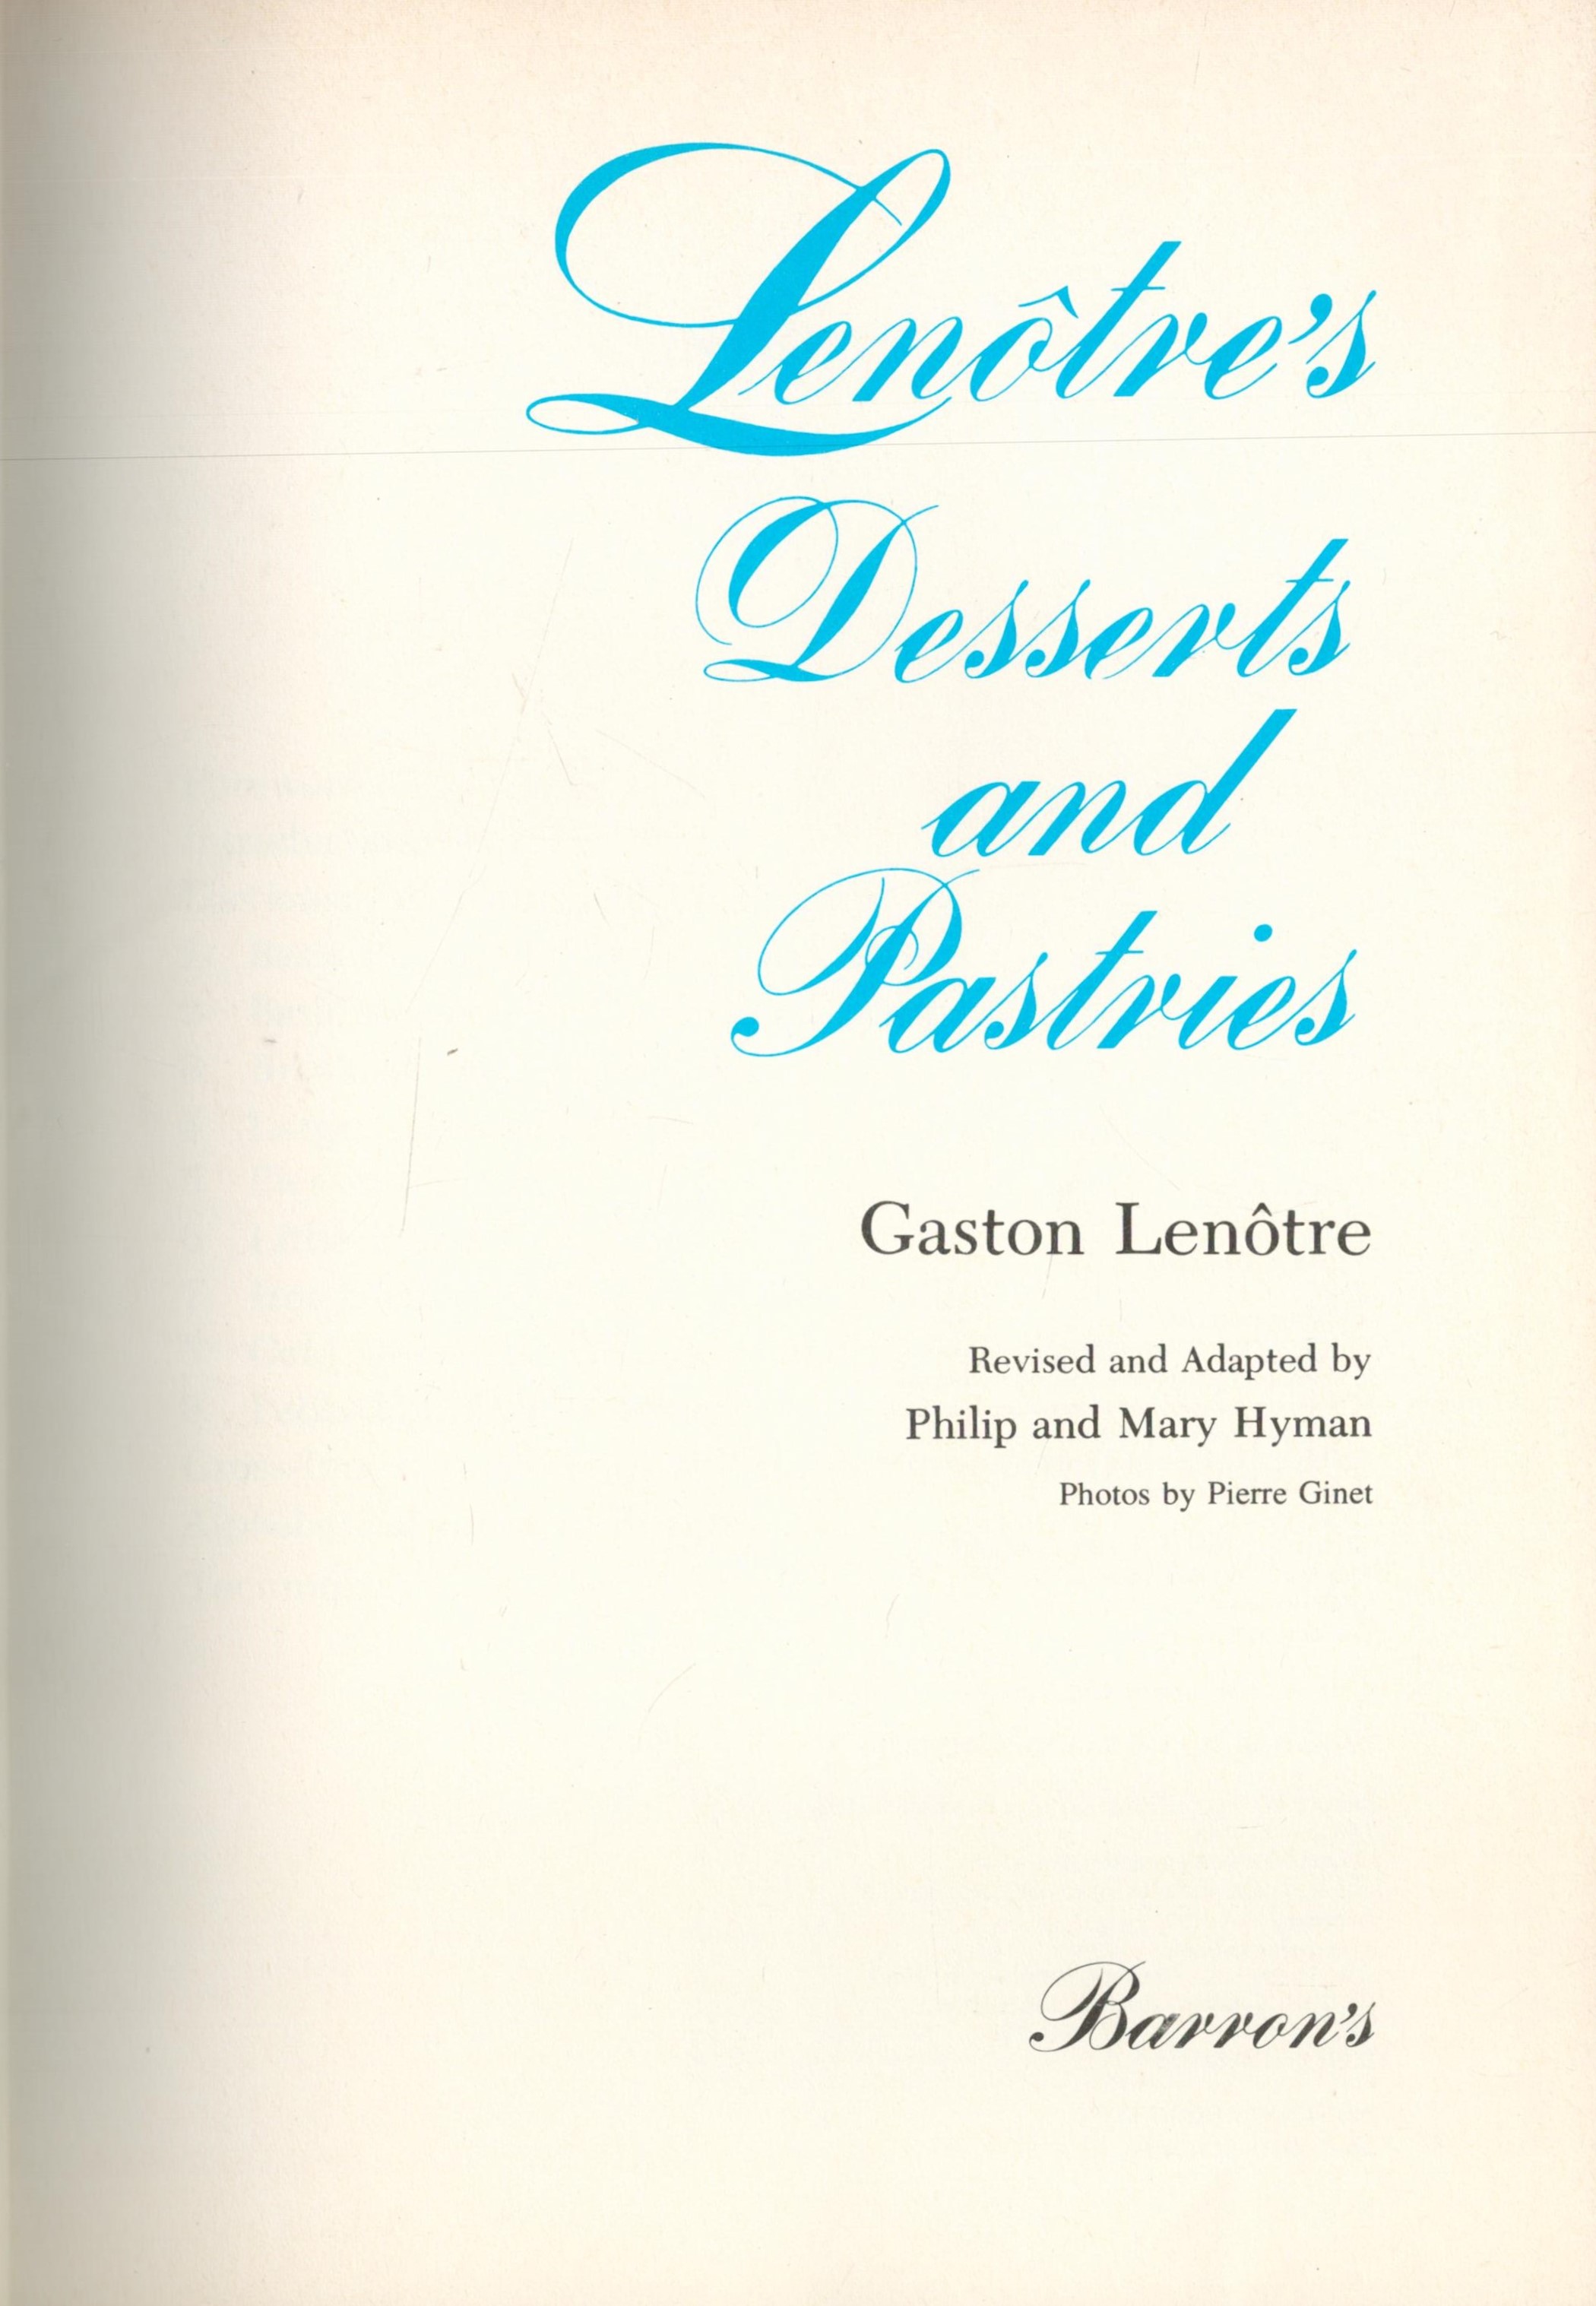 Lenotre's Desserts and Pastries by Gaston Lenotre 1975 First Edition Hardback Book with 312 pages - Image 2 of 3